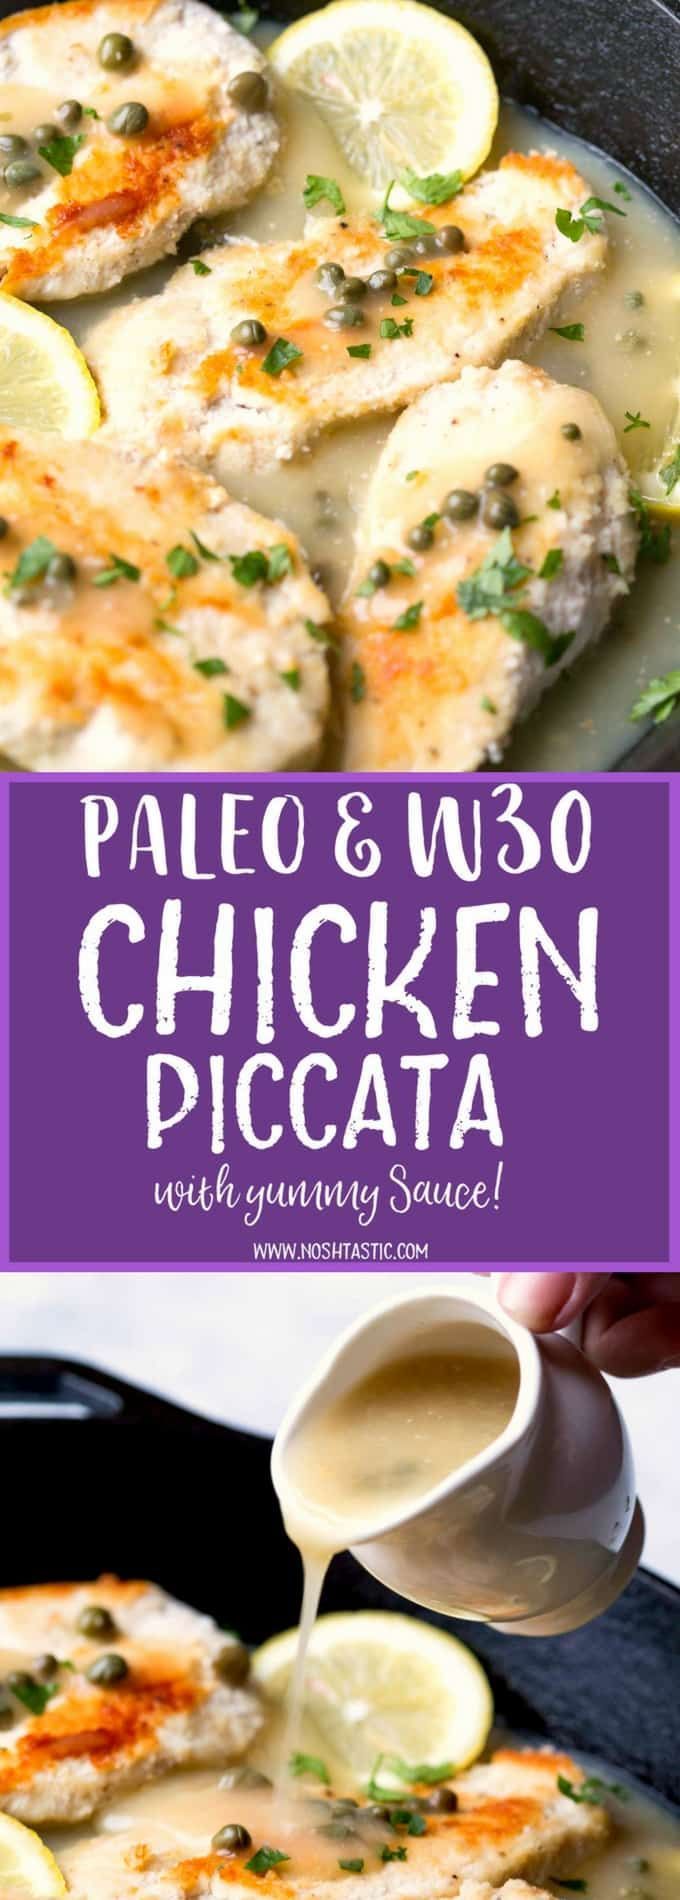 Back on Track Whole30 Meal Plan -   22 elimination diet whole 30
 ideas